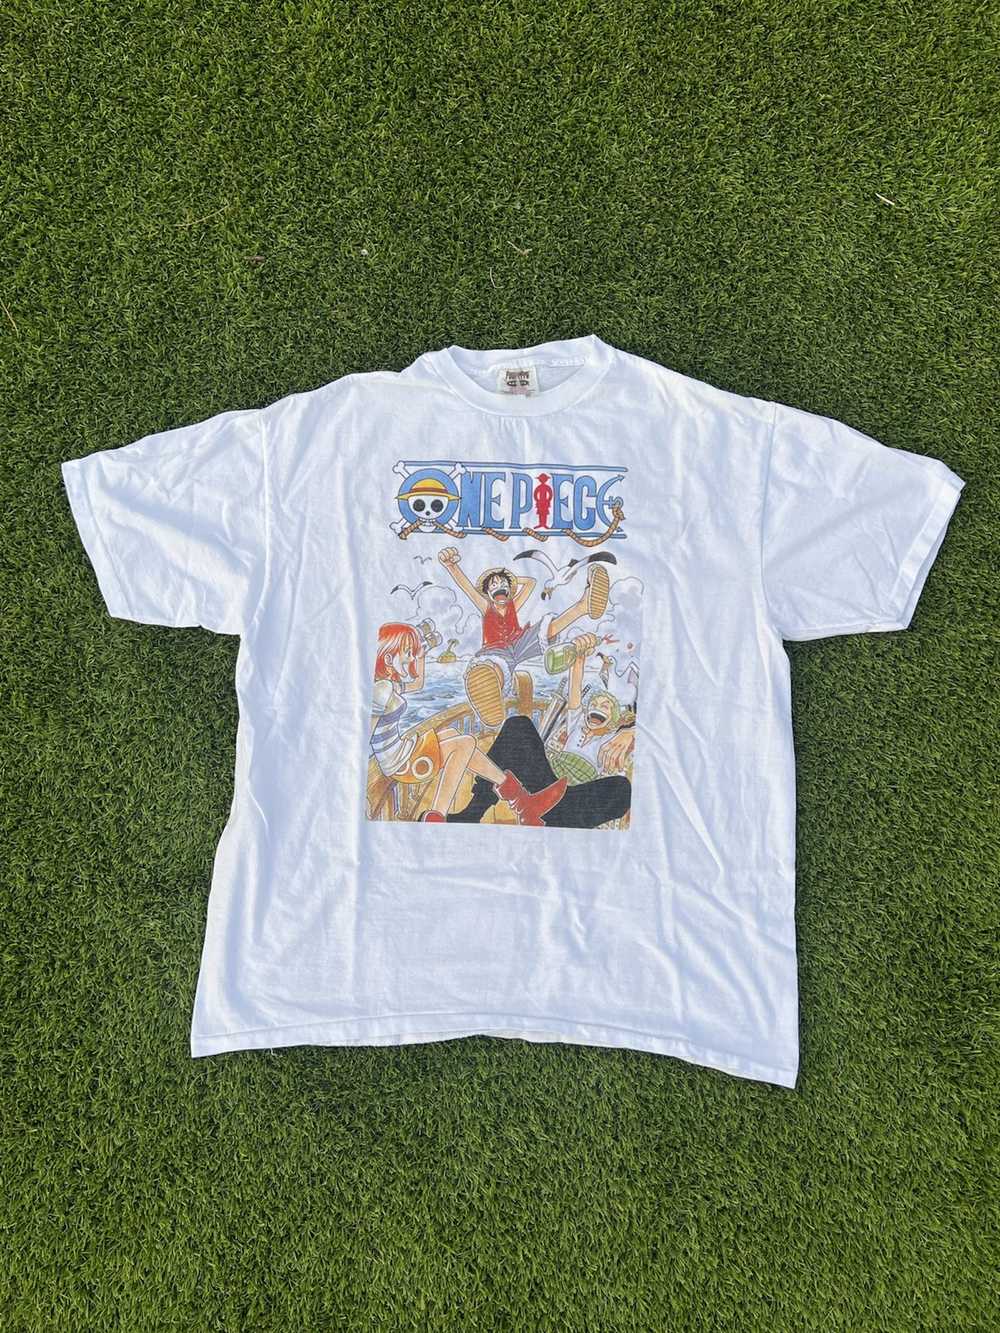 One Piece × Vintage One Piece Tee - image 1